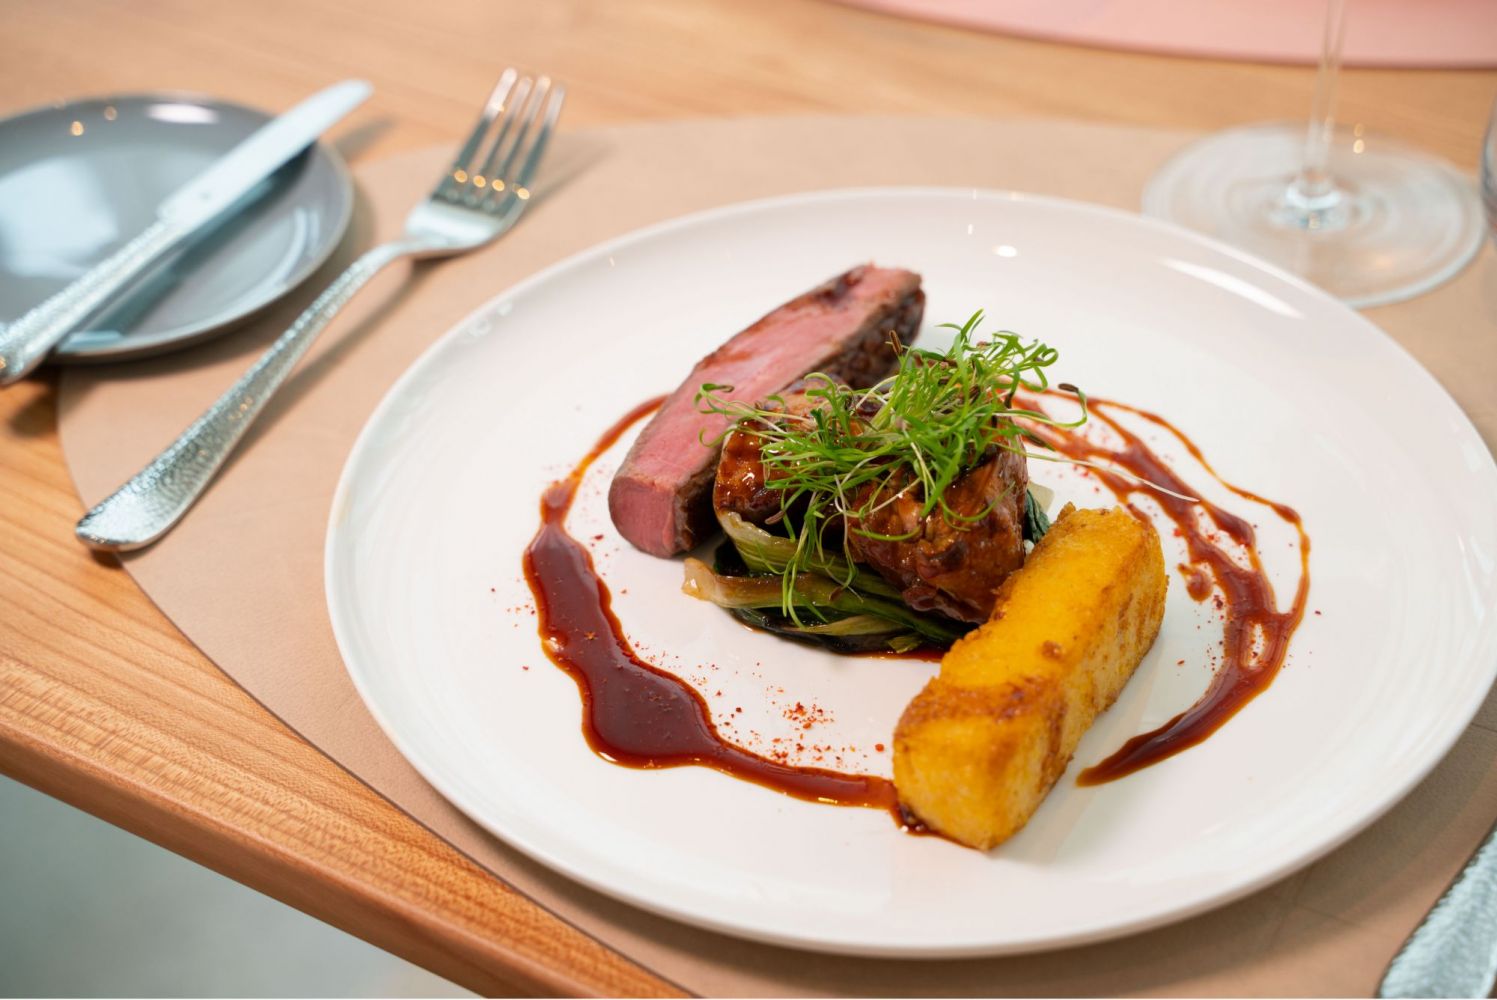 Exclusively served fillet of beef including garnish on a fine place setting.